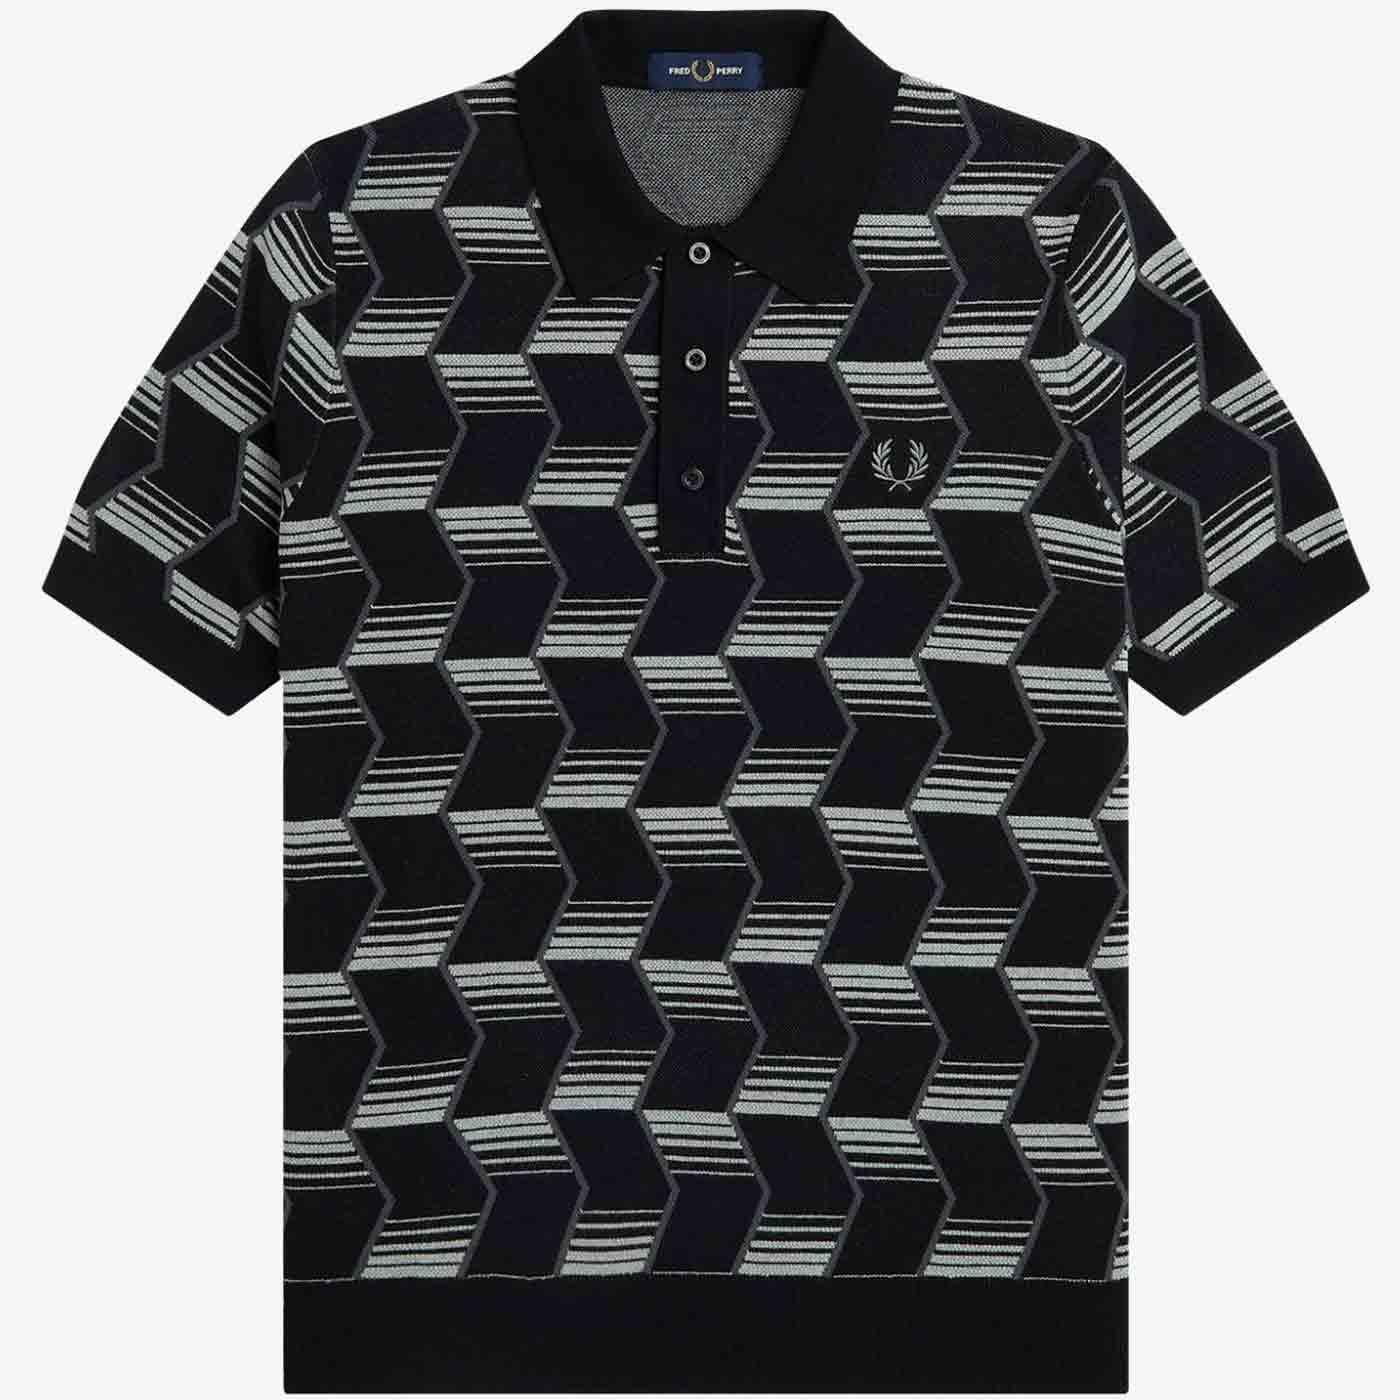 Fred Perry Retro 60s Chevron Stripe Knitted Shirt 